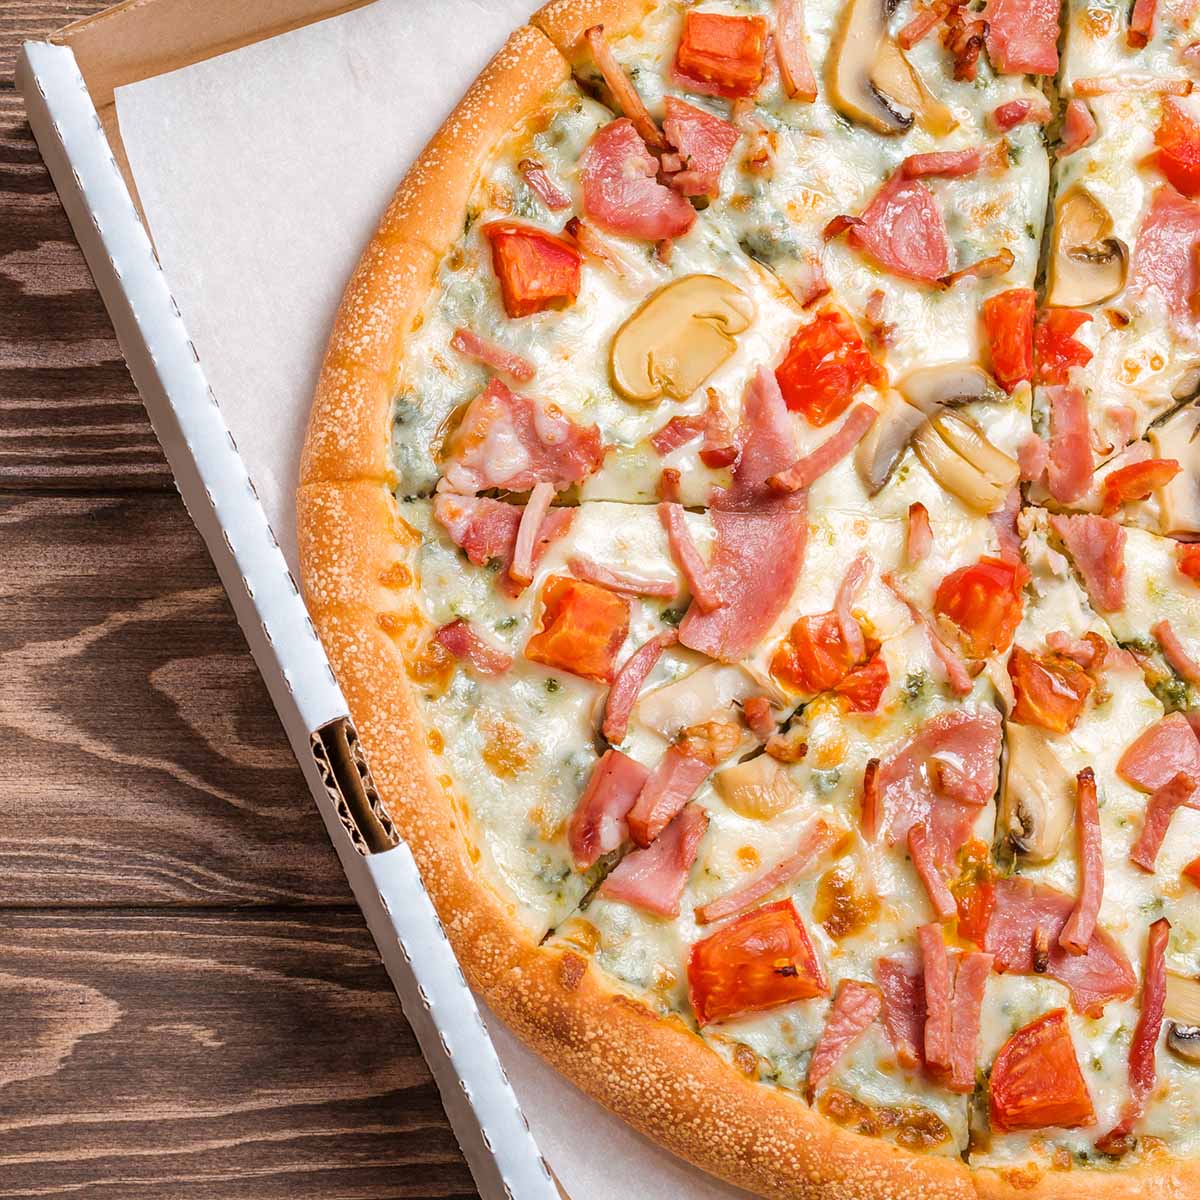 Many people don’t think twice about reheating pizza in its delivery box. They just get on with it. So if you are one of these folks, here is what you ought to do.